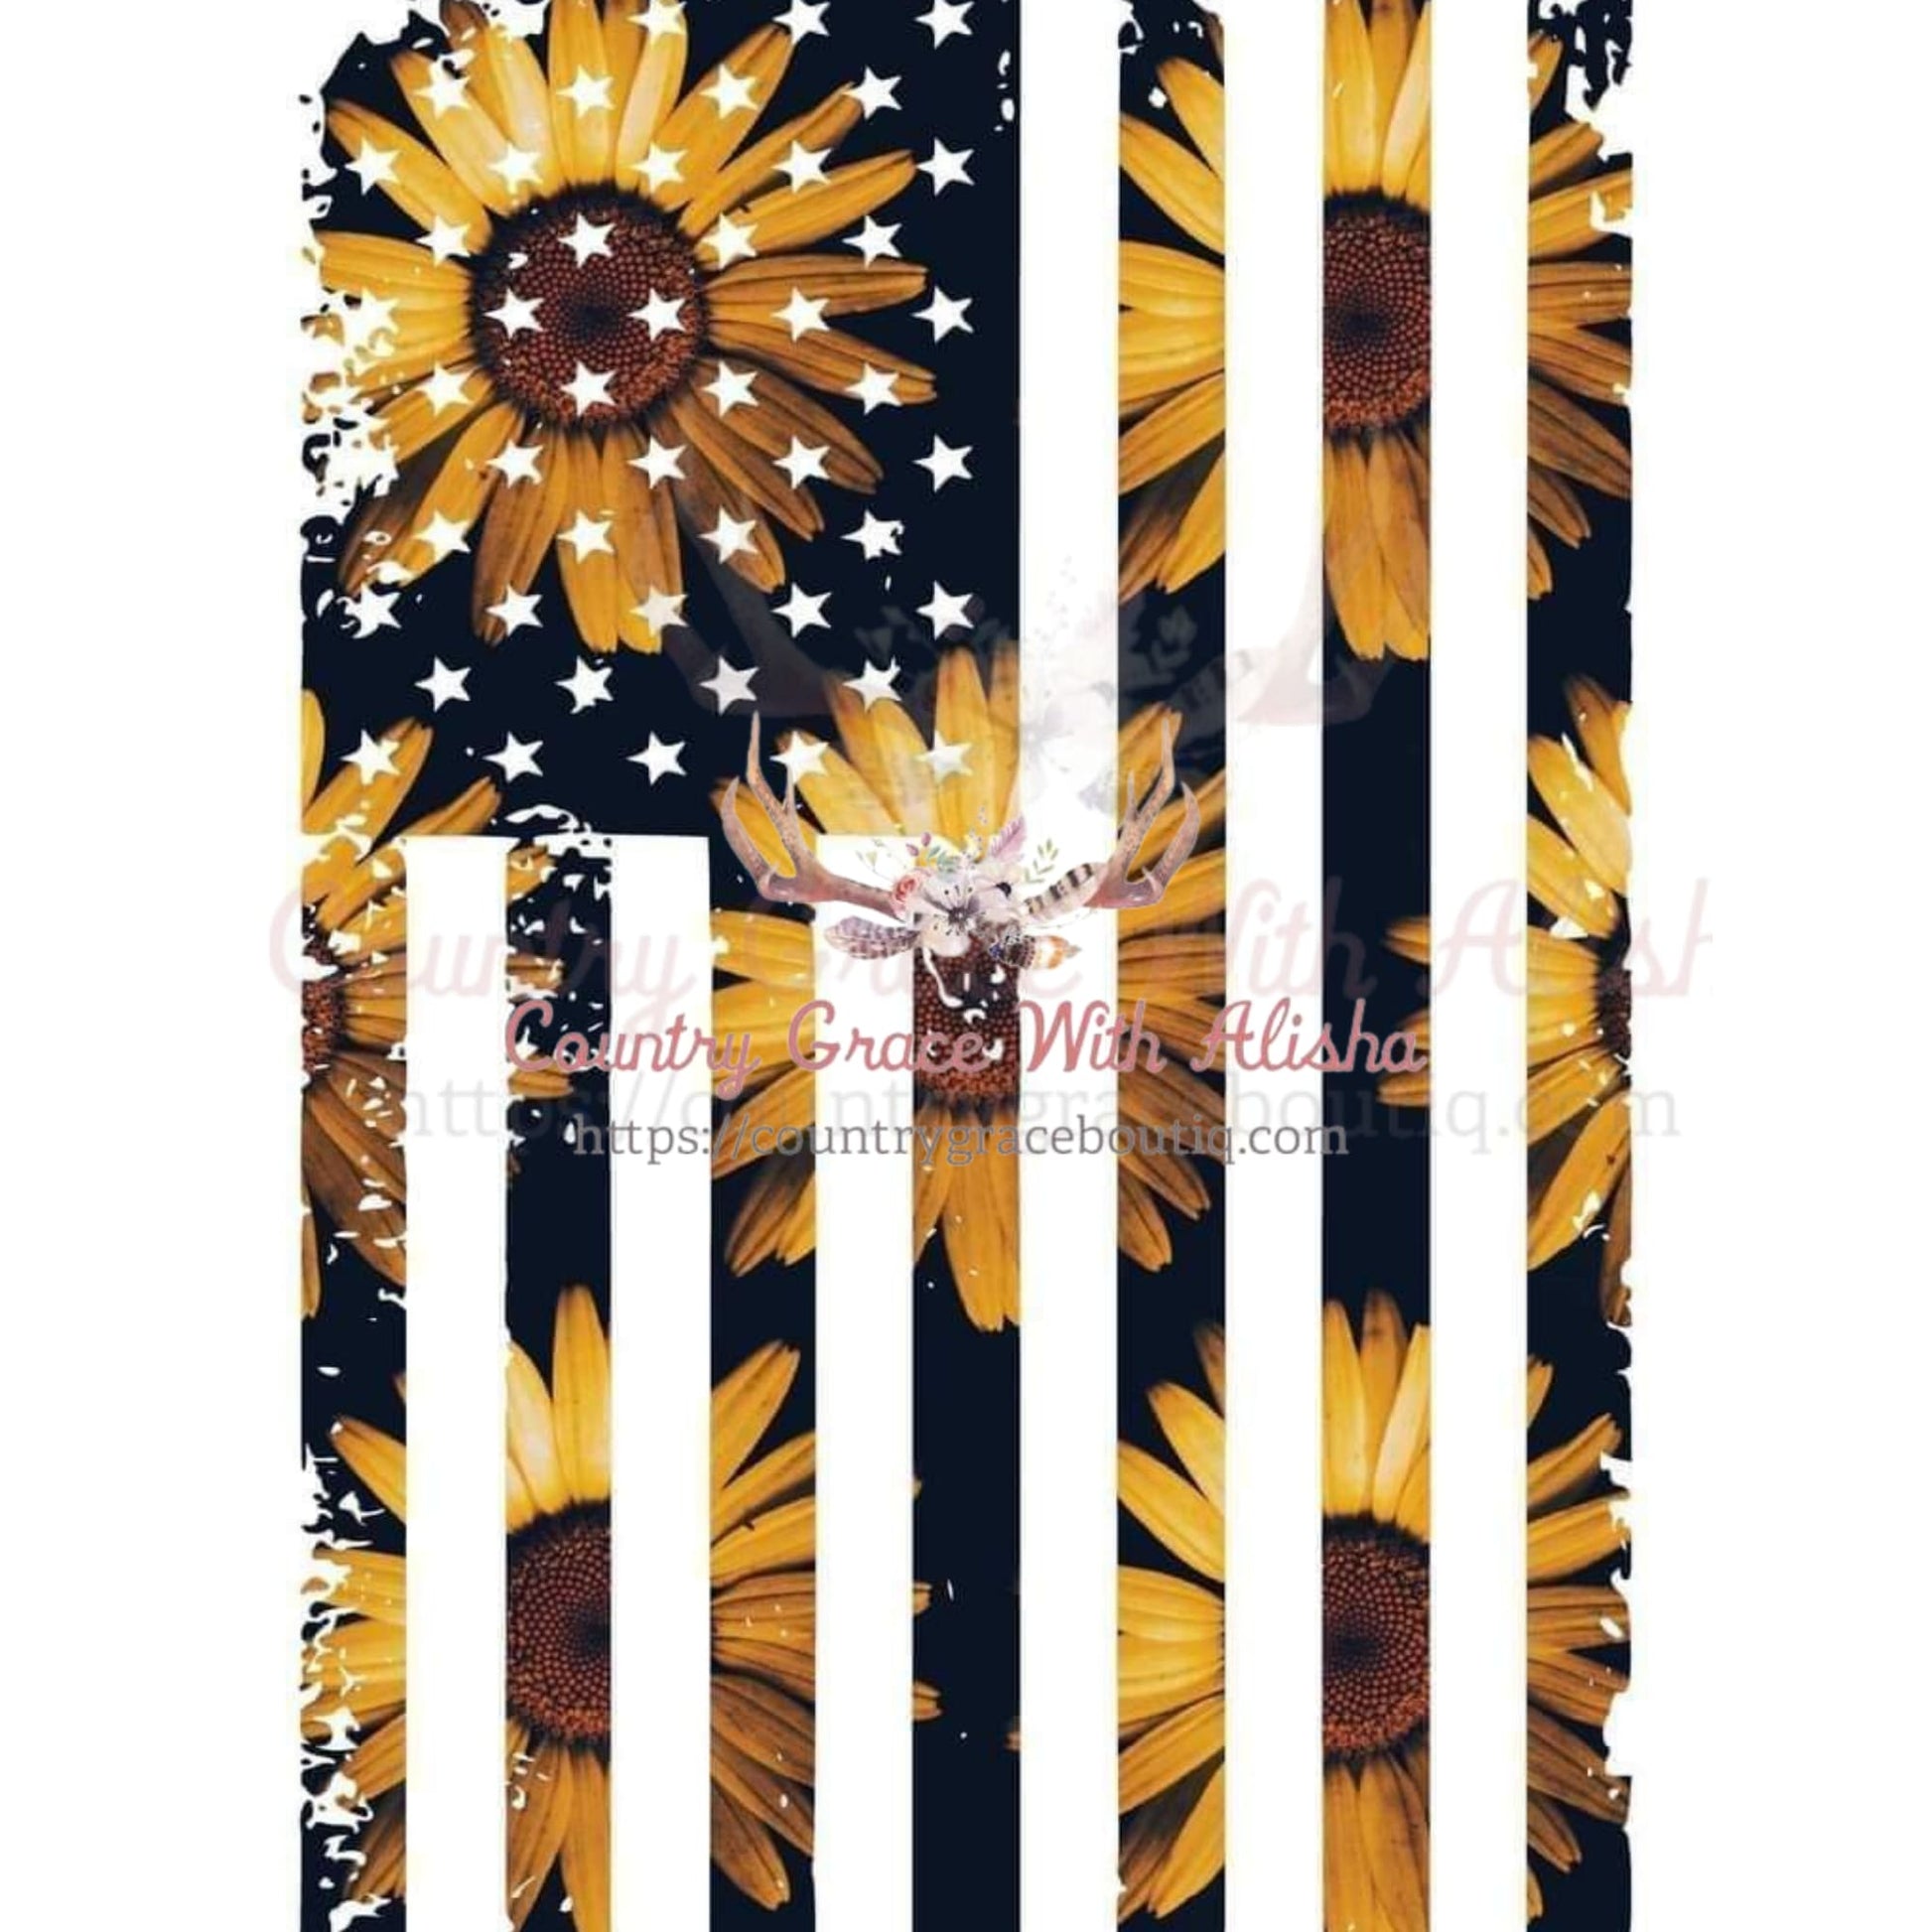 Sunflower Flag Sublimation Transfer - Sub $1.50 Country 